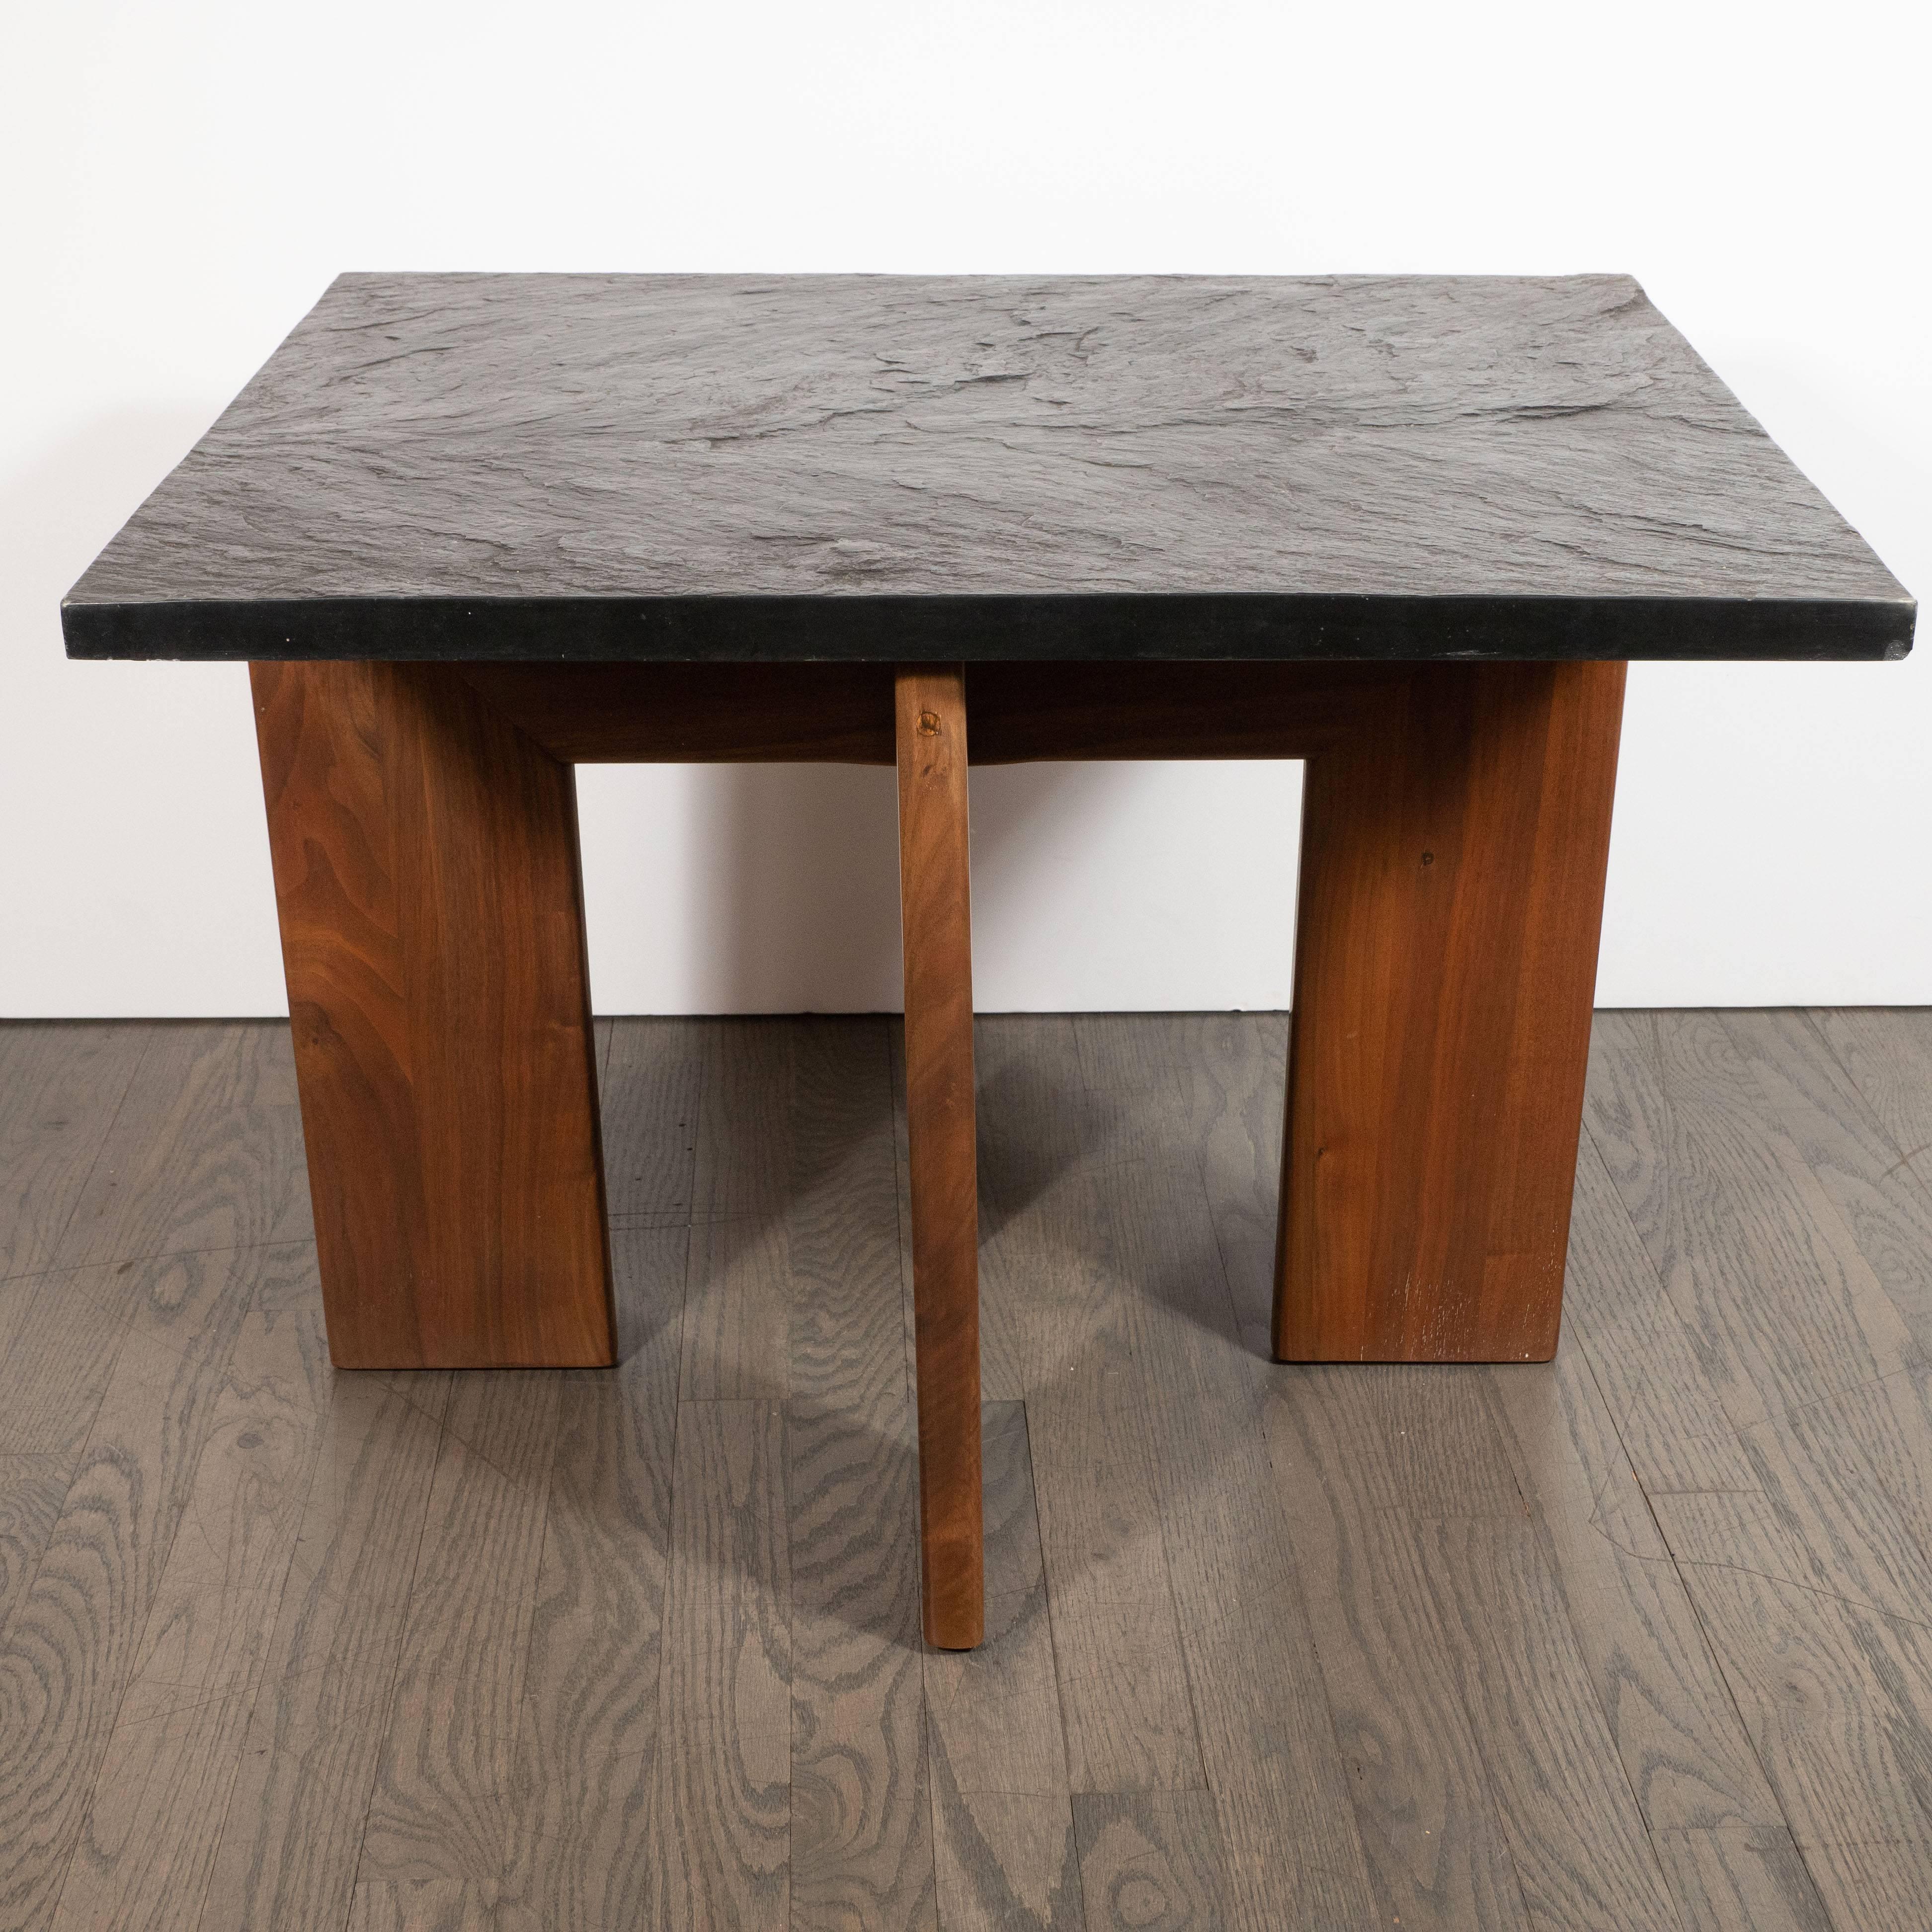 This refined and sophisticated table was realized  by the esteemed designer Adrian Pearsall for Craft Associates in the United States, circa 1960. It features a rectangular slate top resting on four hand rubbed walnut legs that form a right angle at